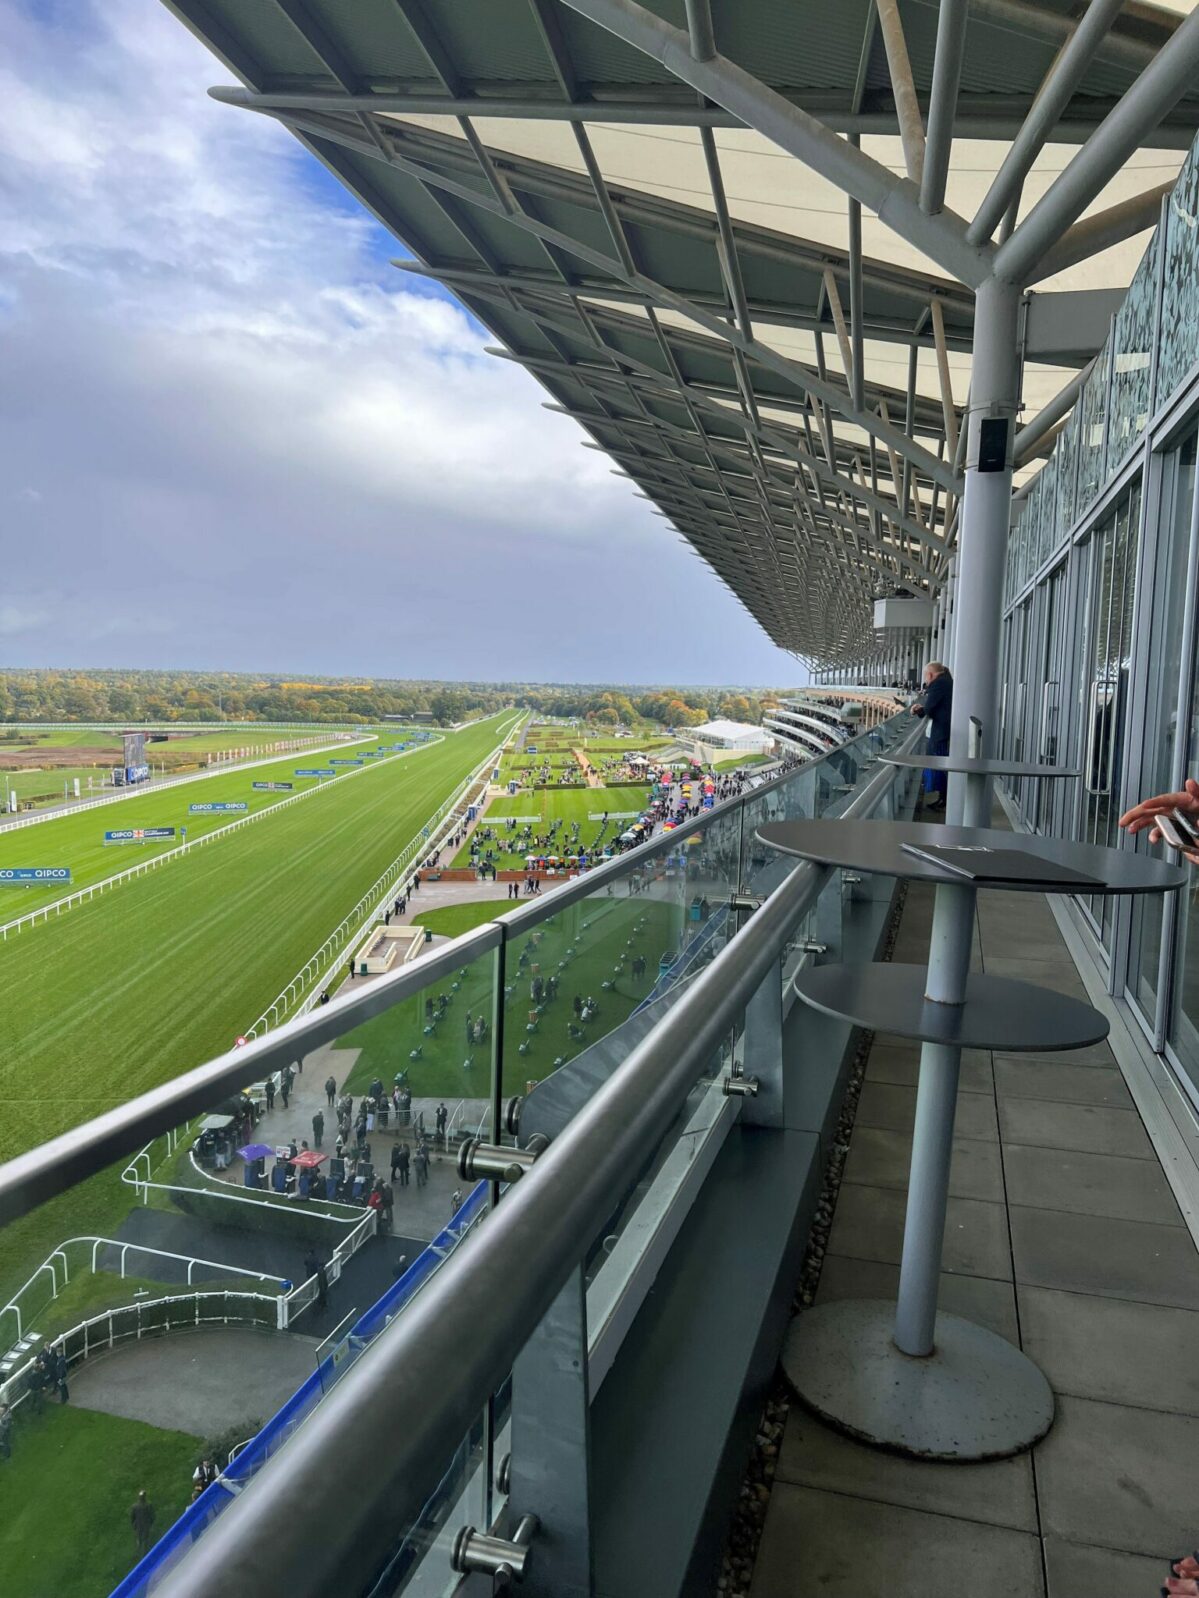 The view of the racetrack for the Panoramic restaurant balcony